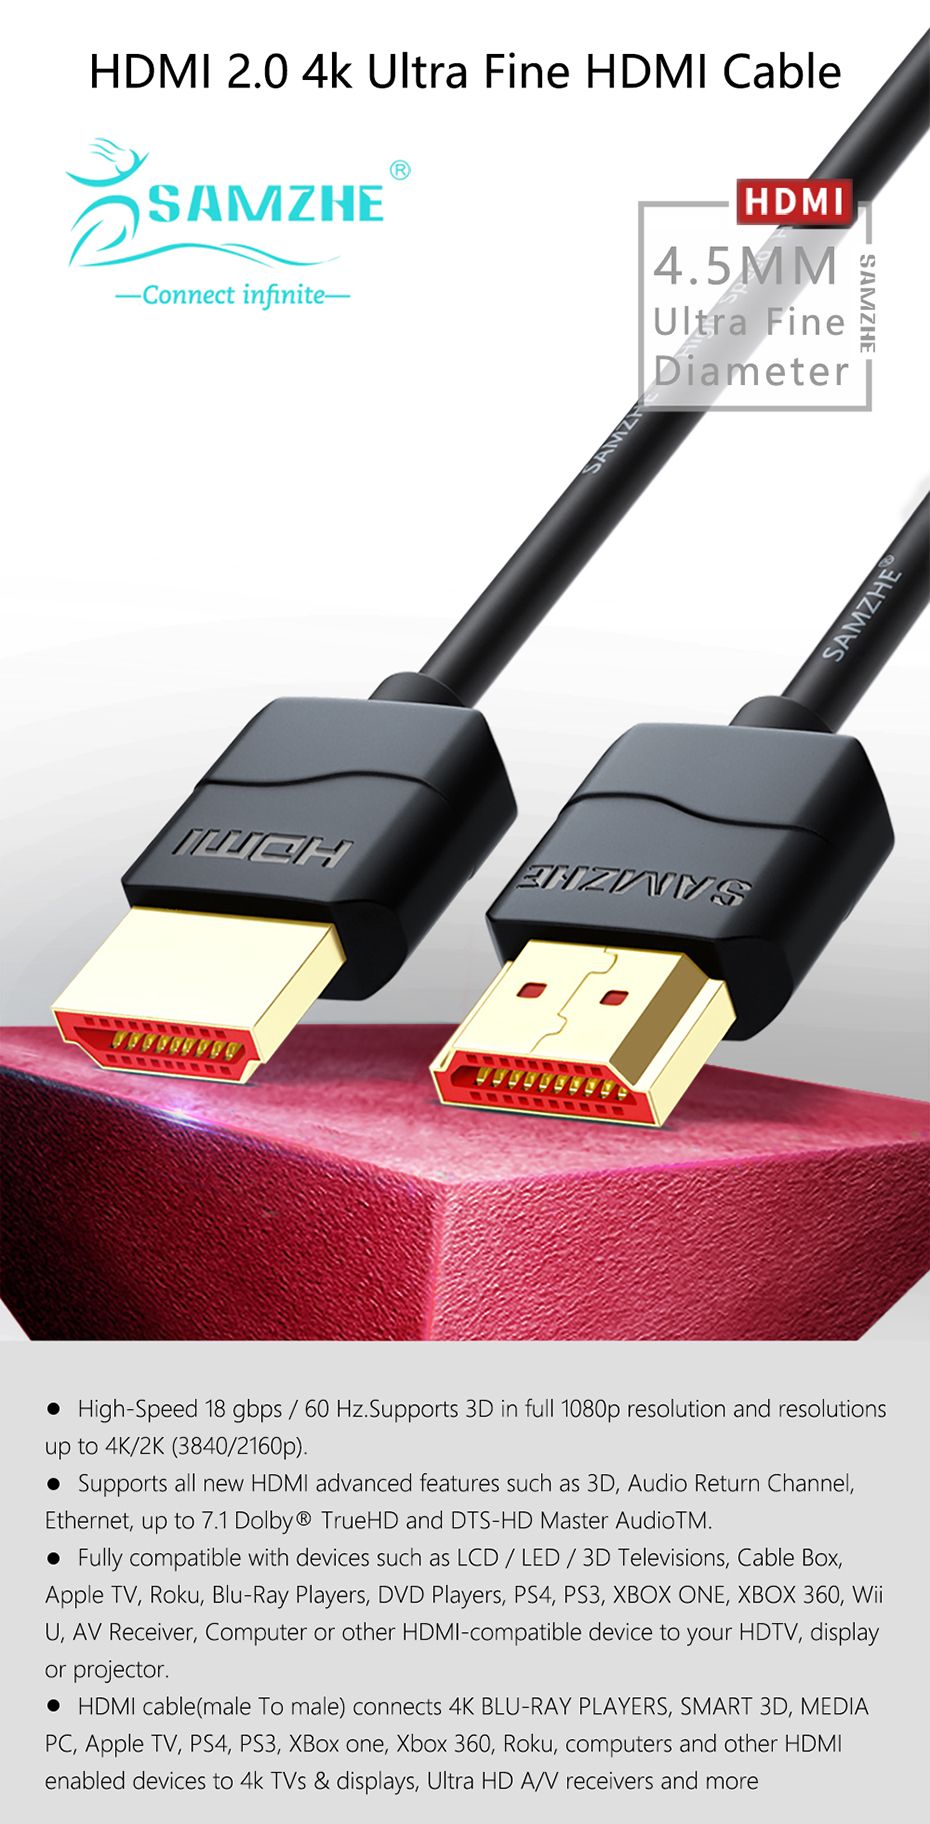 SAMZHE-05AM6-HDMI-Male-to-HDMI-Male-Cable-20-4K-UHD-Video-Cable-for-PS3-PS4-xbox-Projector-LCD-TV-05-1431444